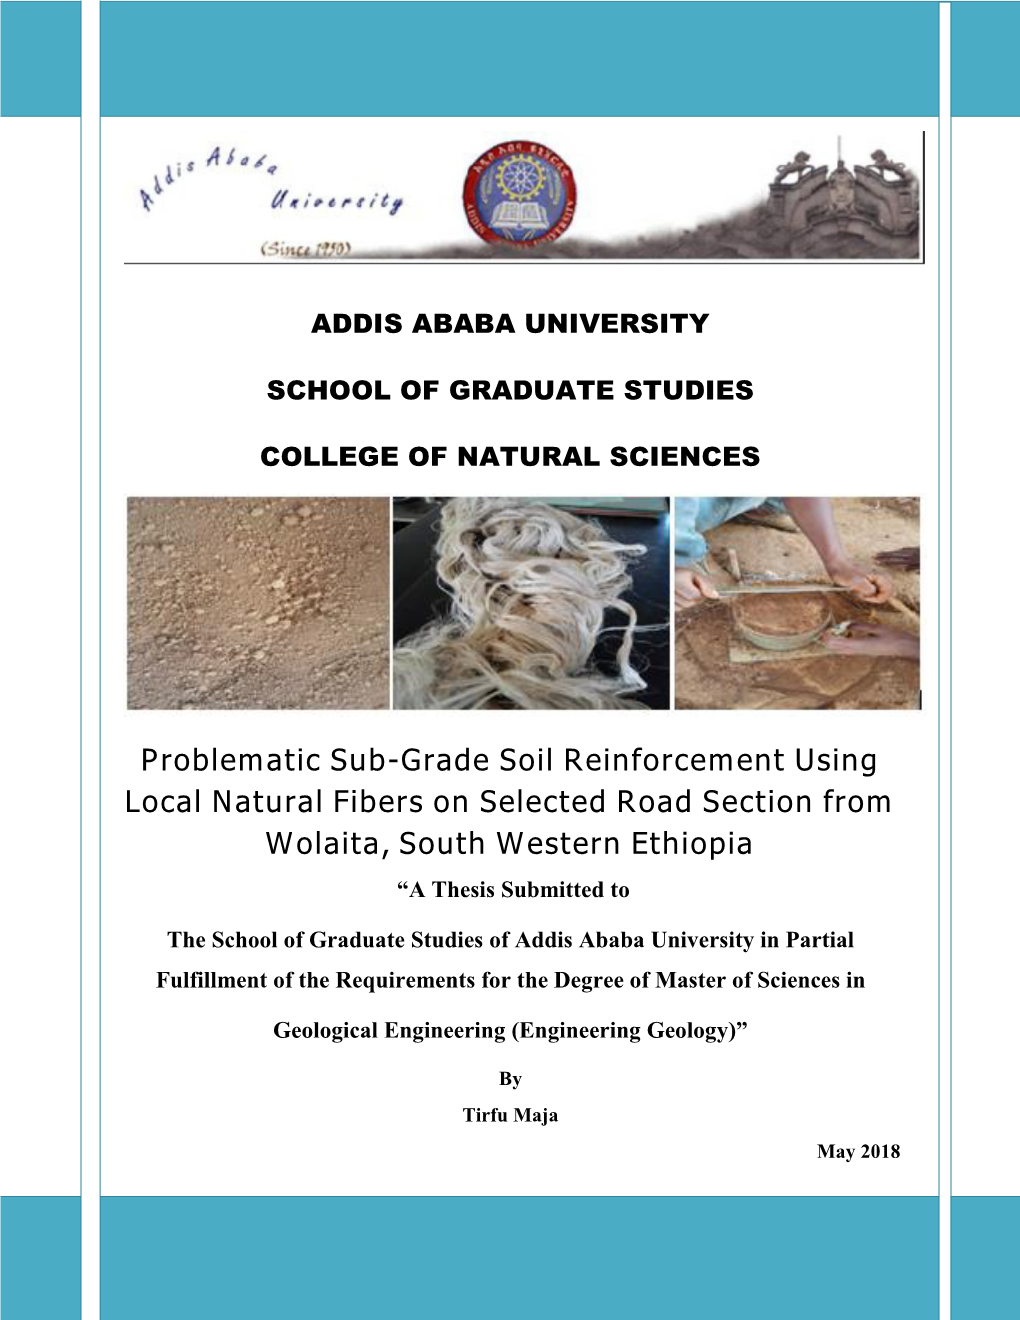 Problematic Sub-Grade Soil Reinforcement Using Local Natural Fibers on Selected Road Section from Wolaita, South Western Ethiopia “A Thesis Submitted To